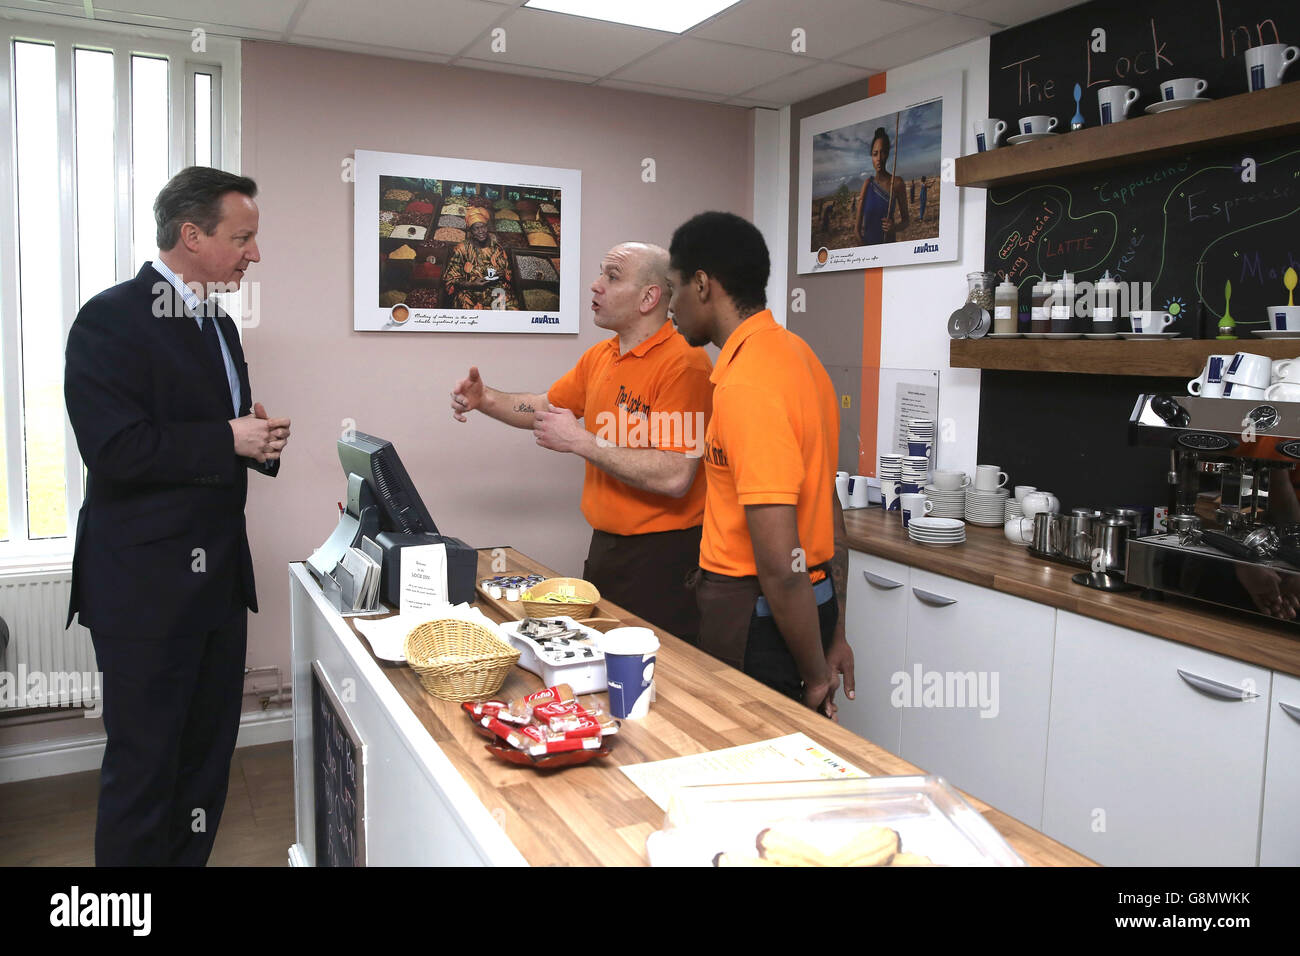 Prime Minister David Cameron talks to inmates Richard and Michael (right) inside The Lock Inn Cafe as he tours HMP Onley in Rugby ahead of a major speech on prison reform. Stock Photo